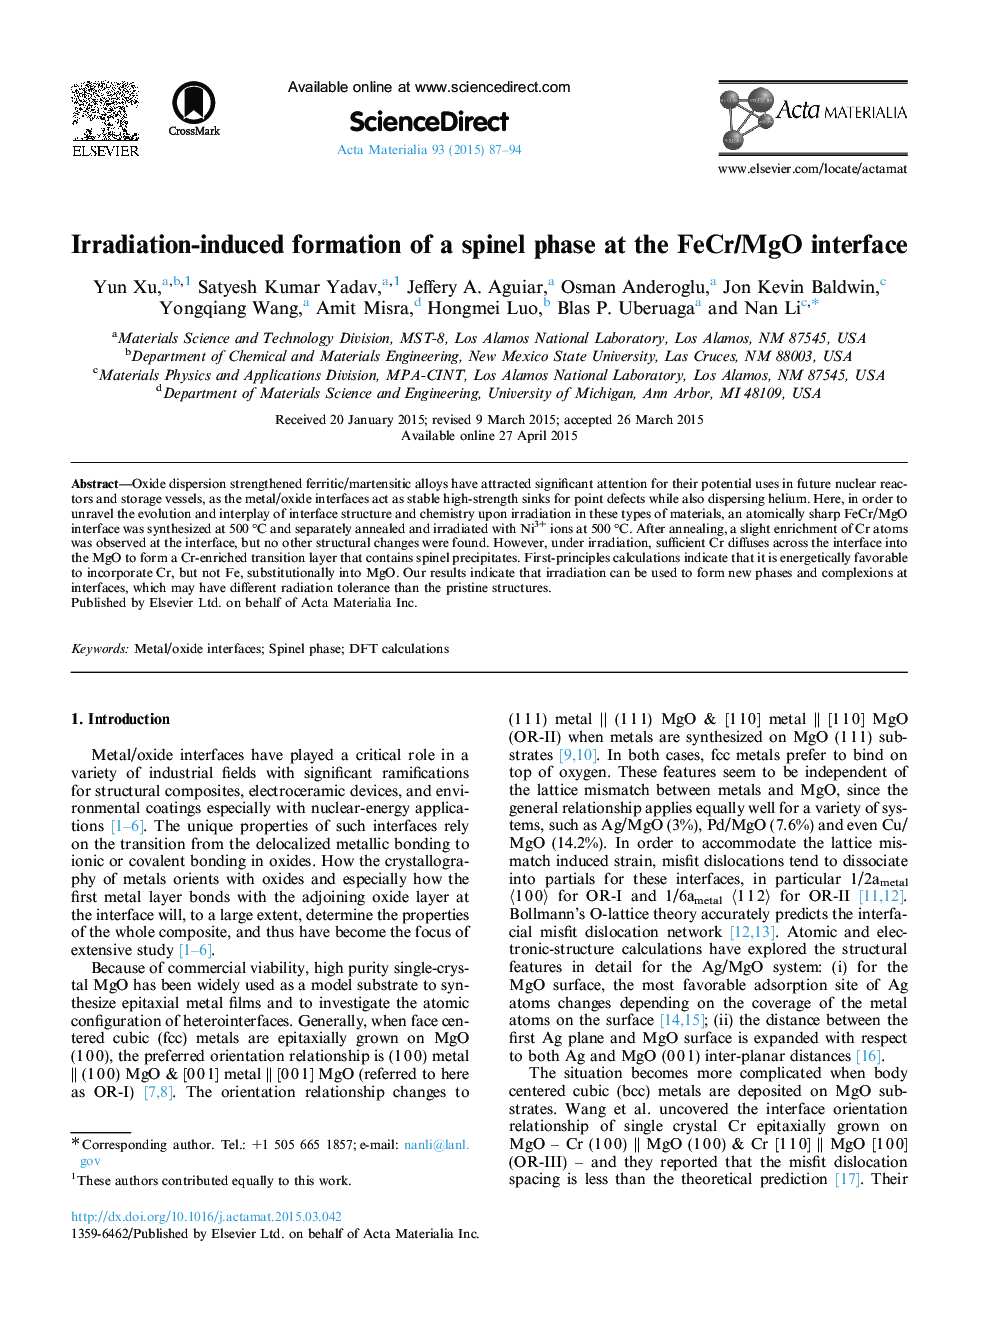 Irradiation-induced formation of a spinel phase at the FeCr/MgO interface